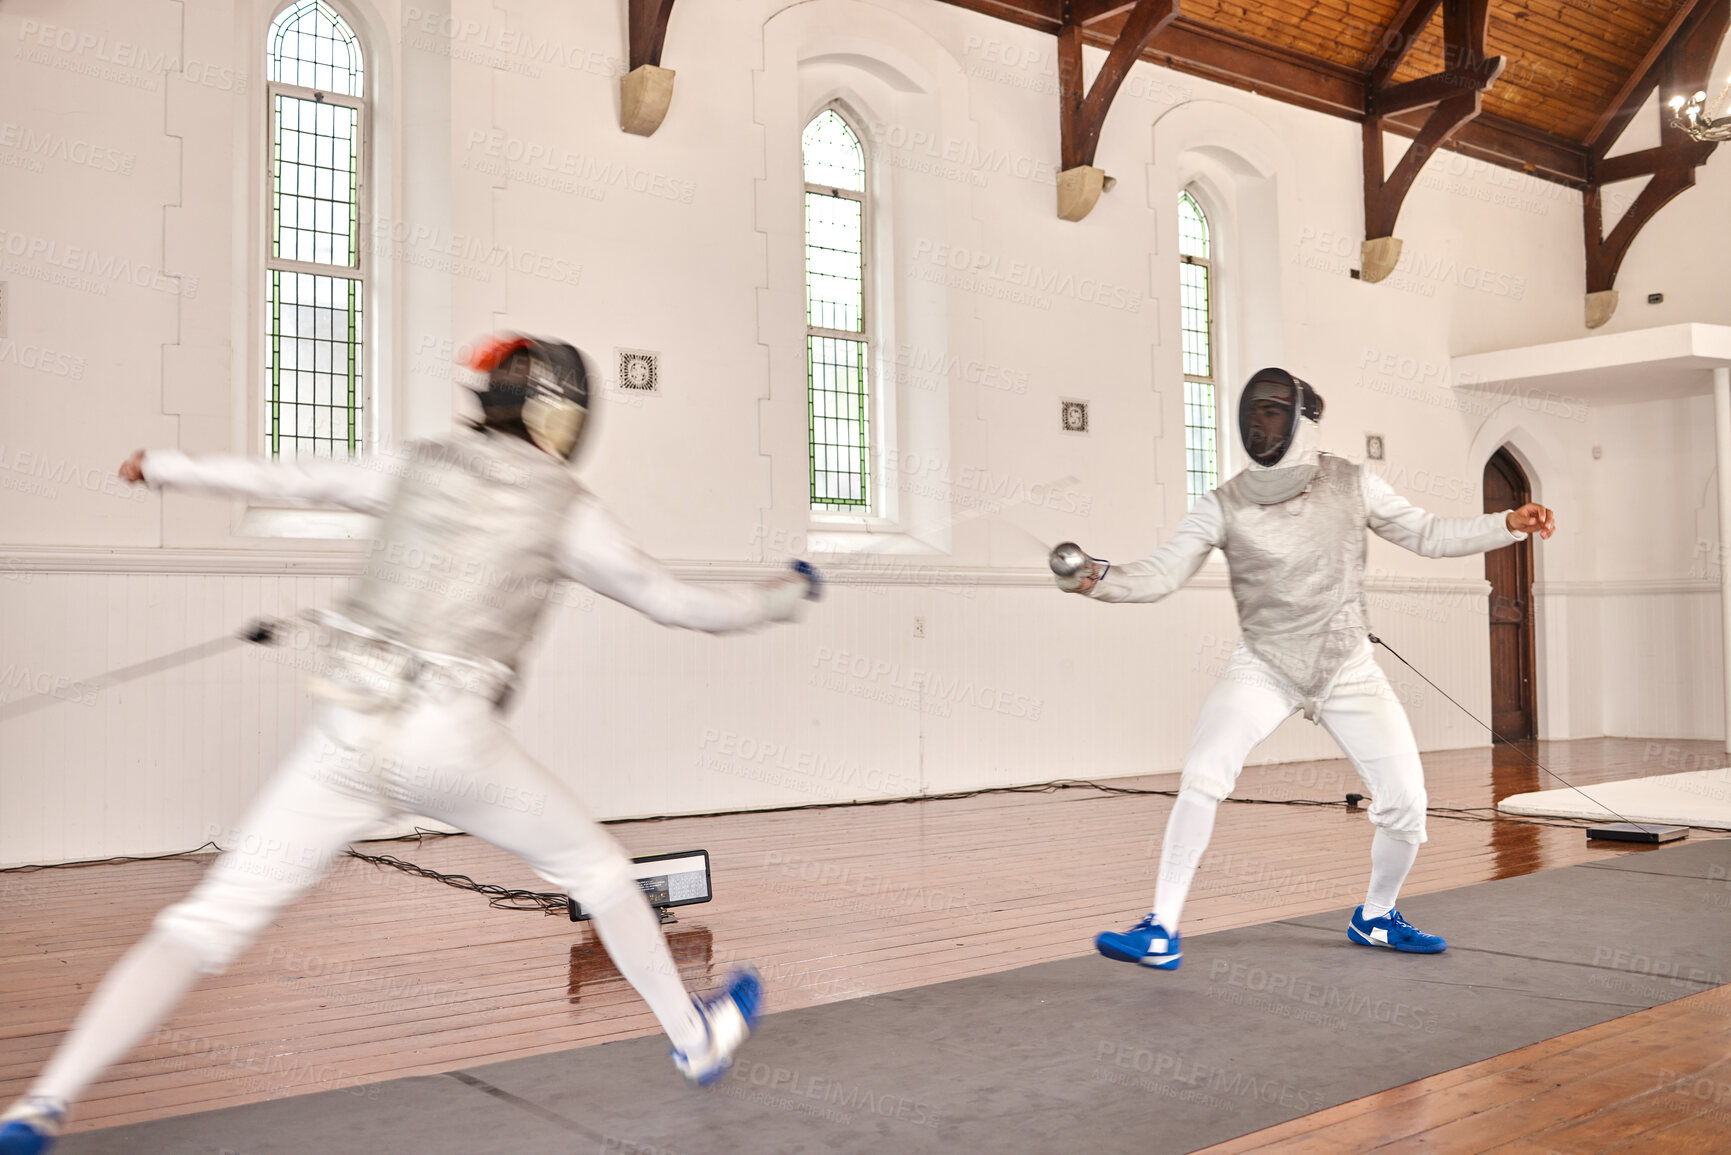 Buy stock photo Fencing, sport and men with sword to fight in training, exercise or workout in a hall. Martial arts, match and fencers or people with mask and costume for fitness, competition or target in swordplay